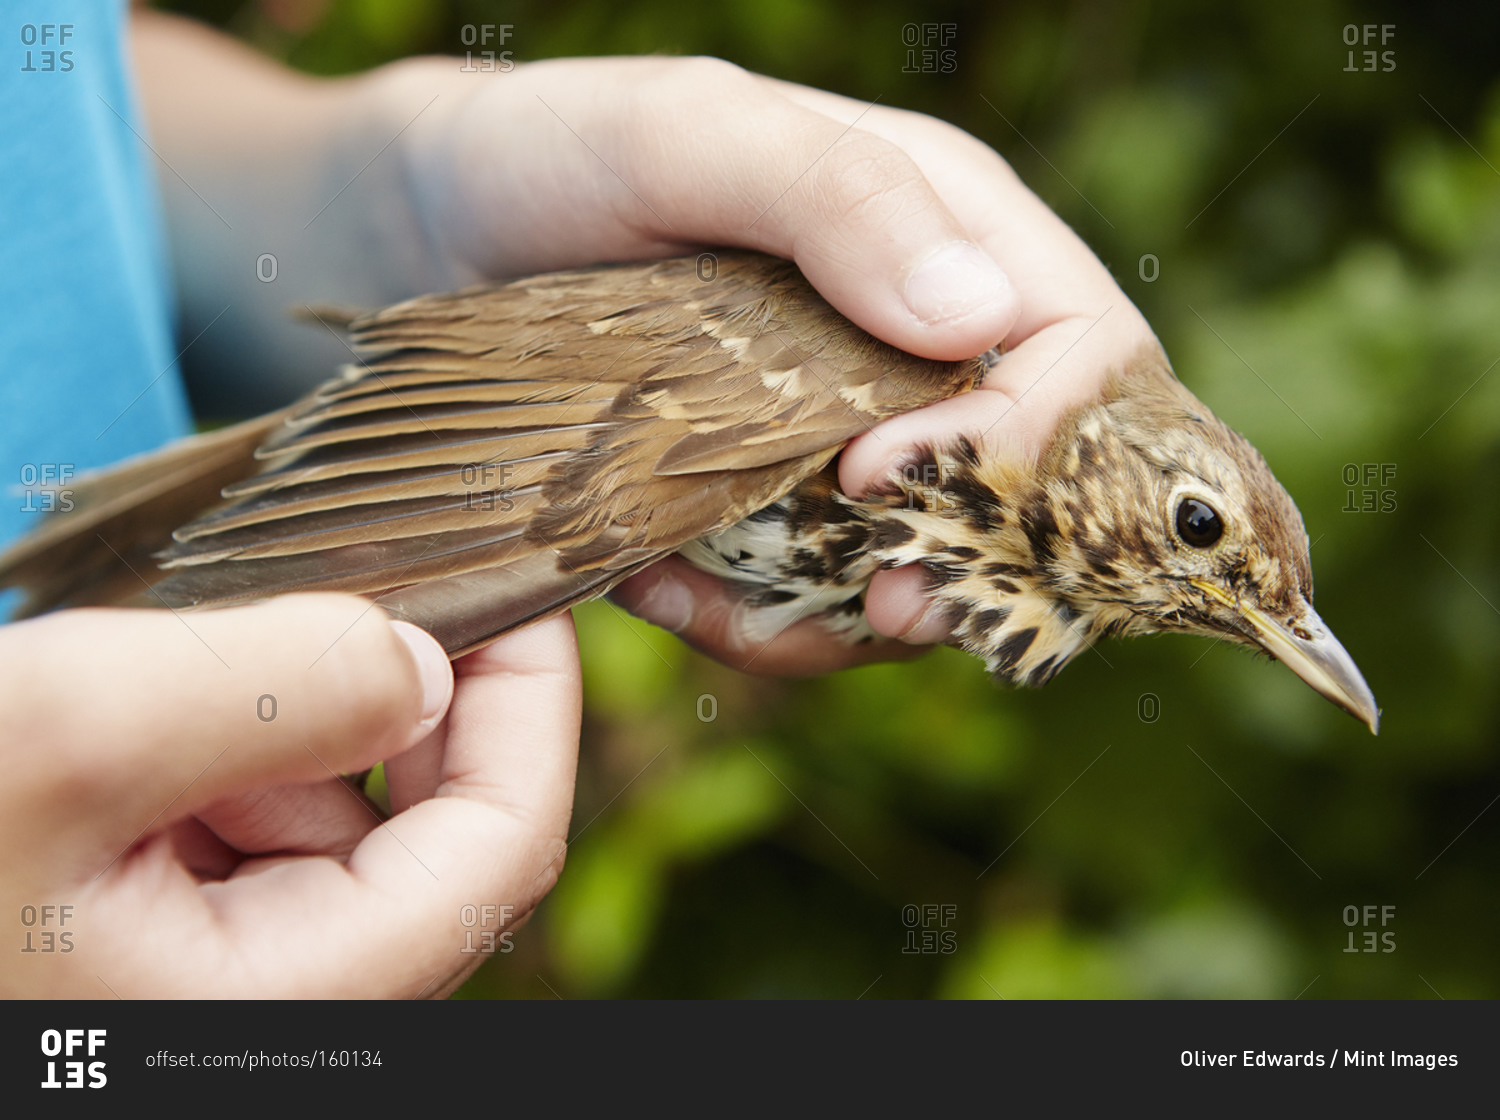 A girl holding a wild bird carefully in her hands checking the wing